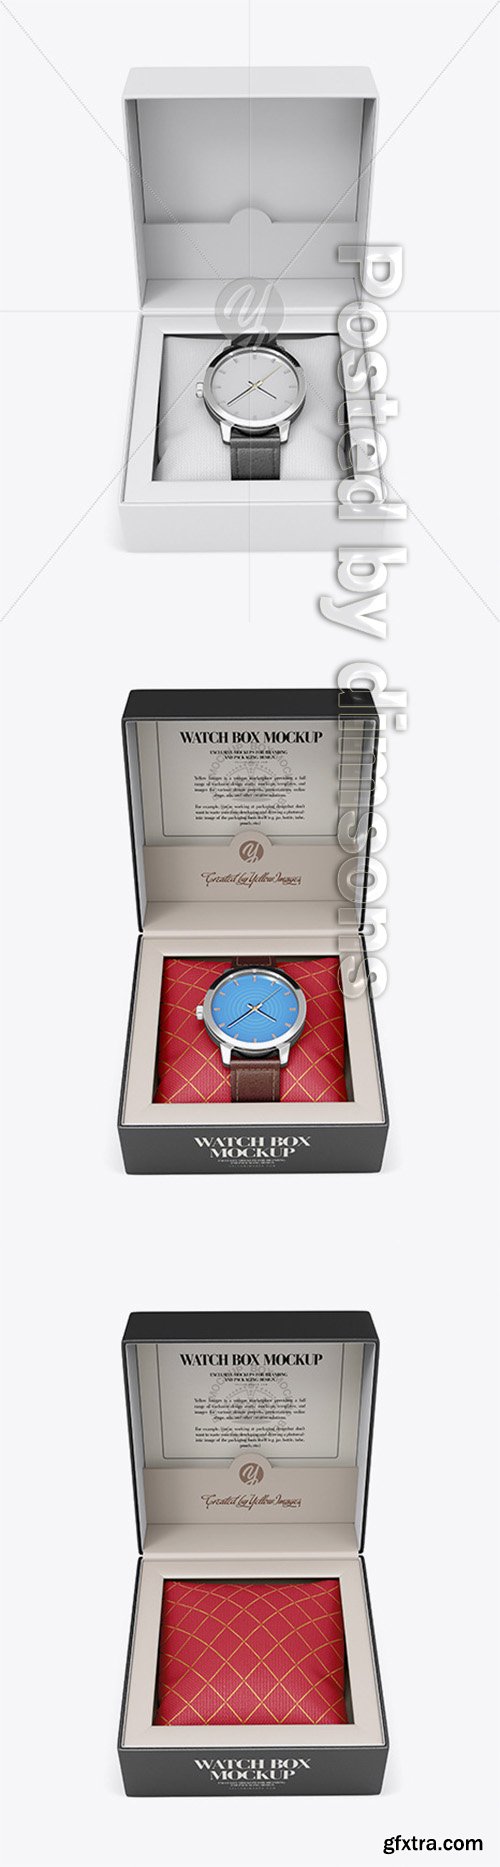 Opened Watch Box Mockup - Front View 51464